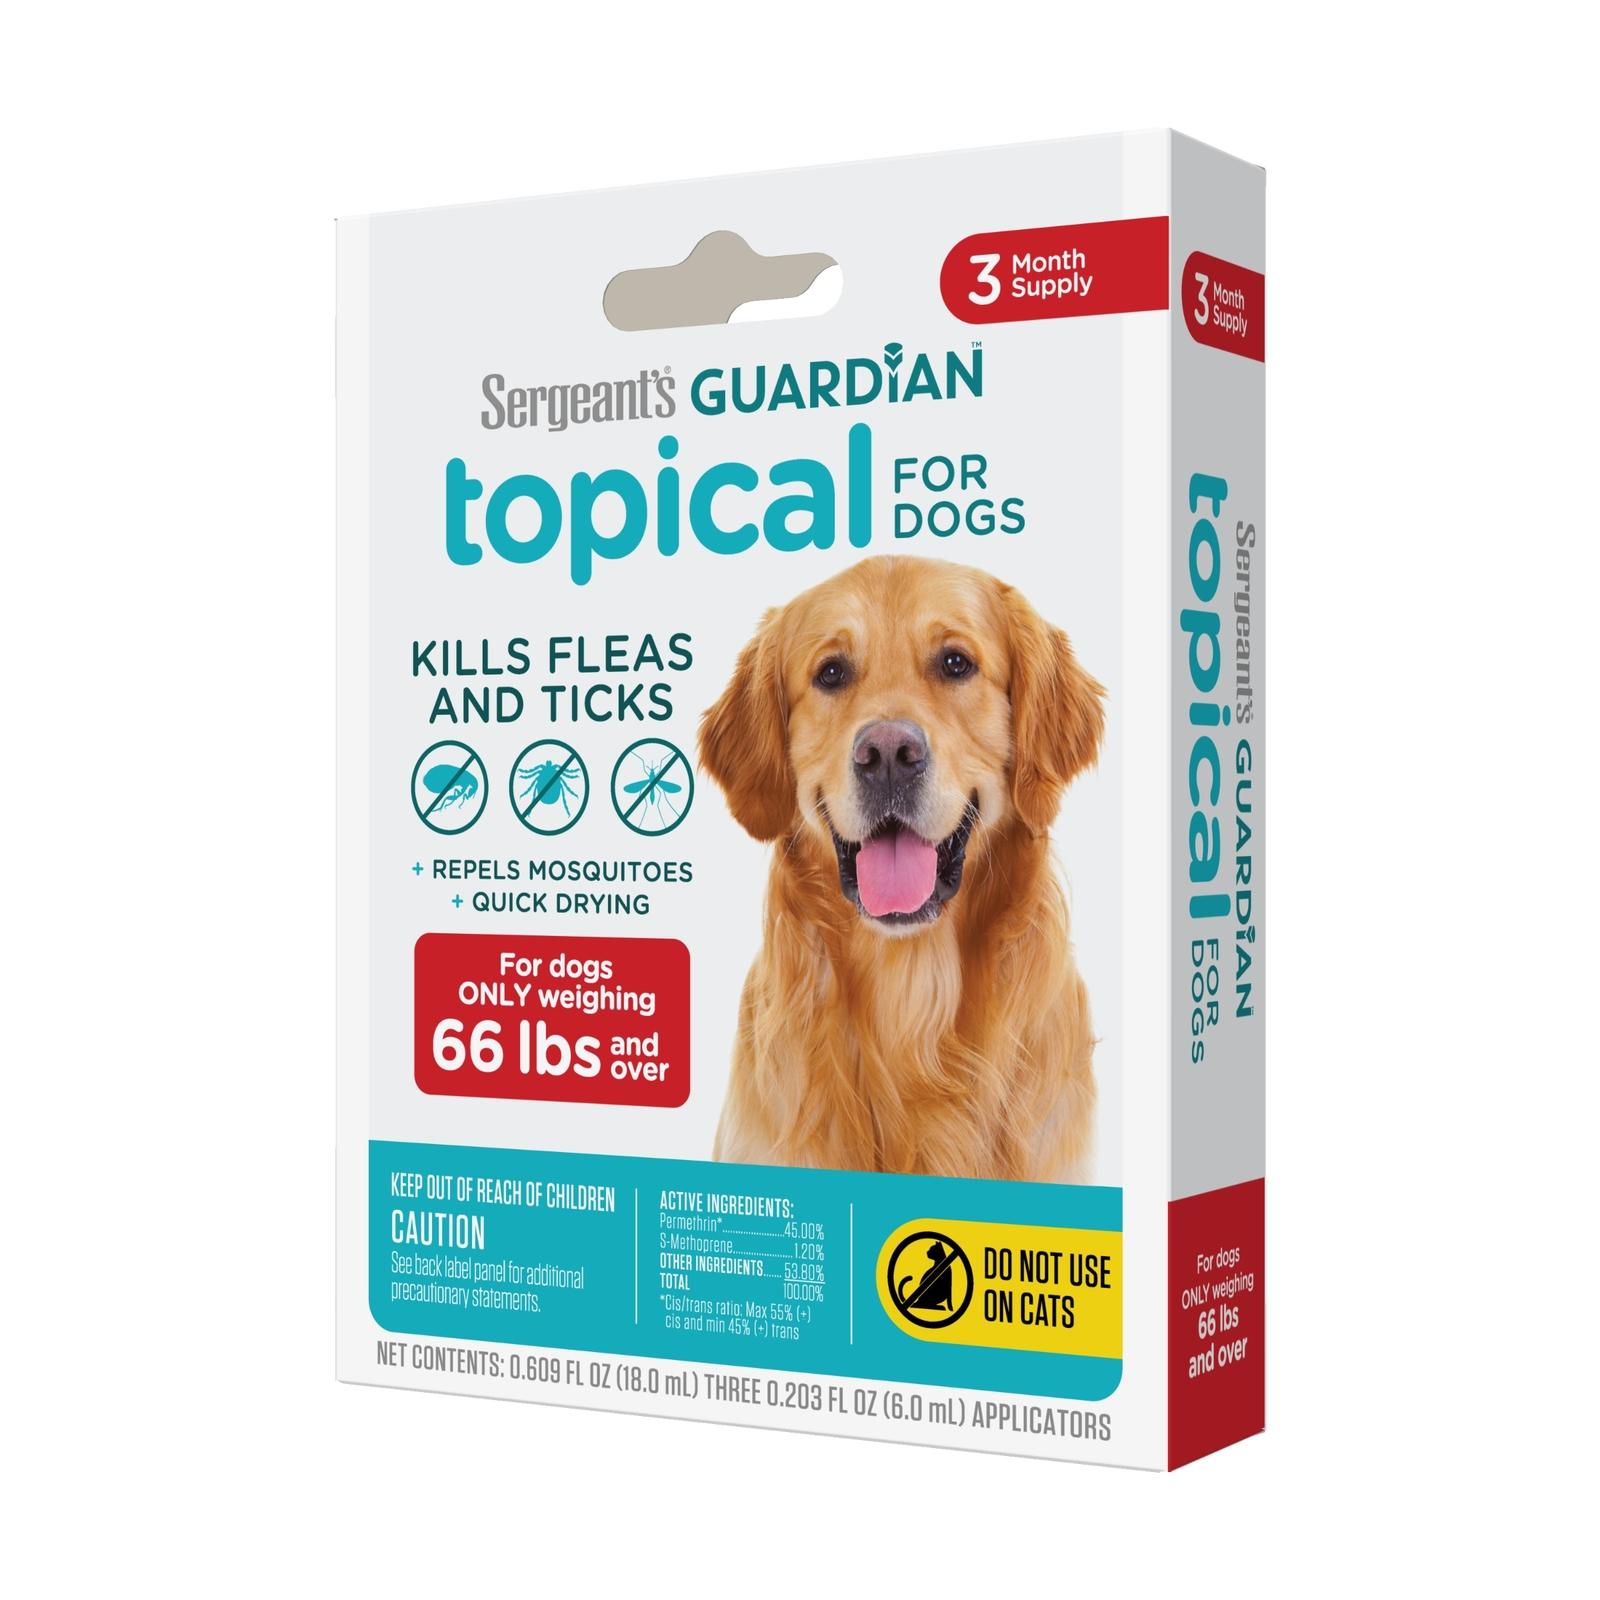 Sergeant's Guardian's Flea & Tick Topical for Dog's 66lbs and Over, 3 Count